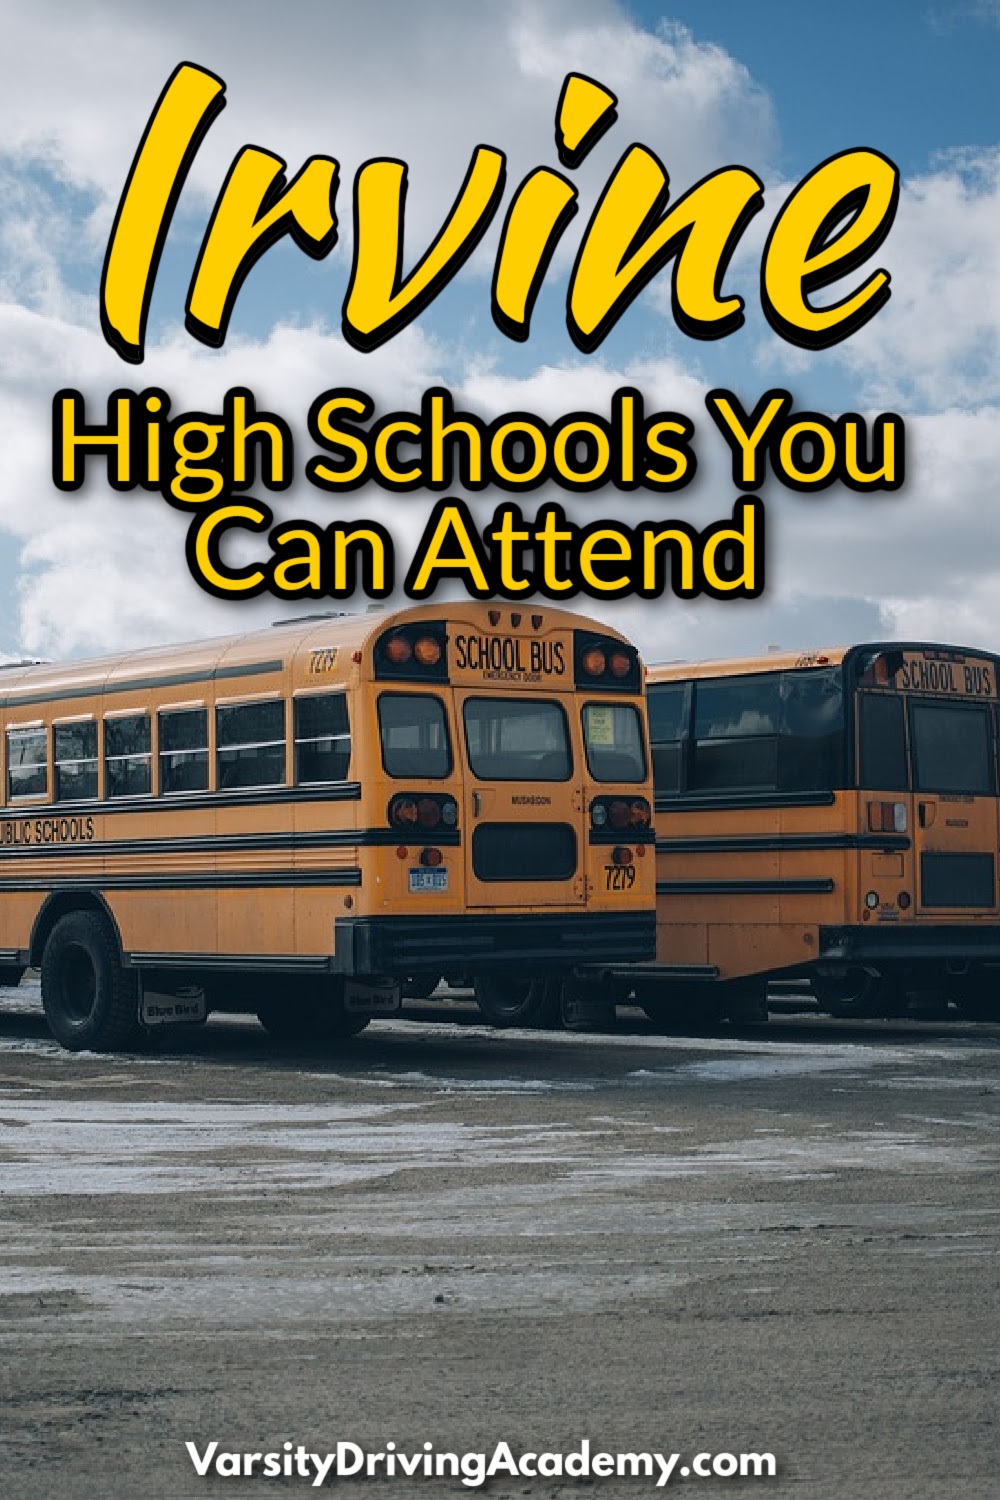 Find out which Irvine California, high schools you can attend and get started with enrollment so you can experience the best in California.